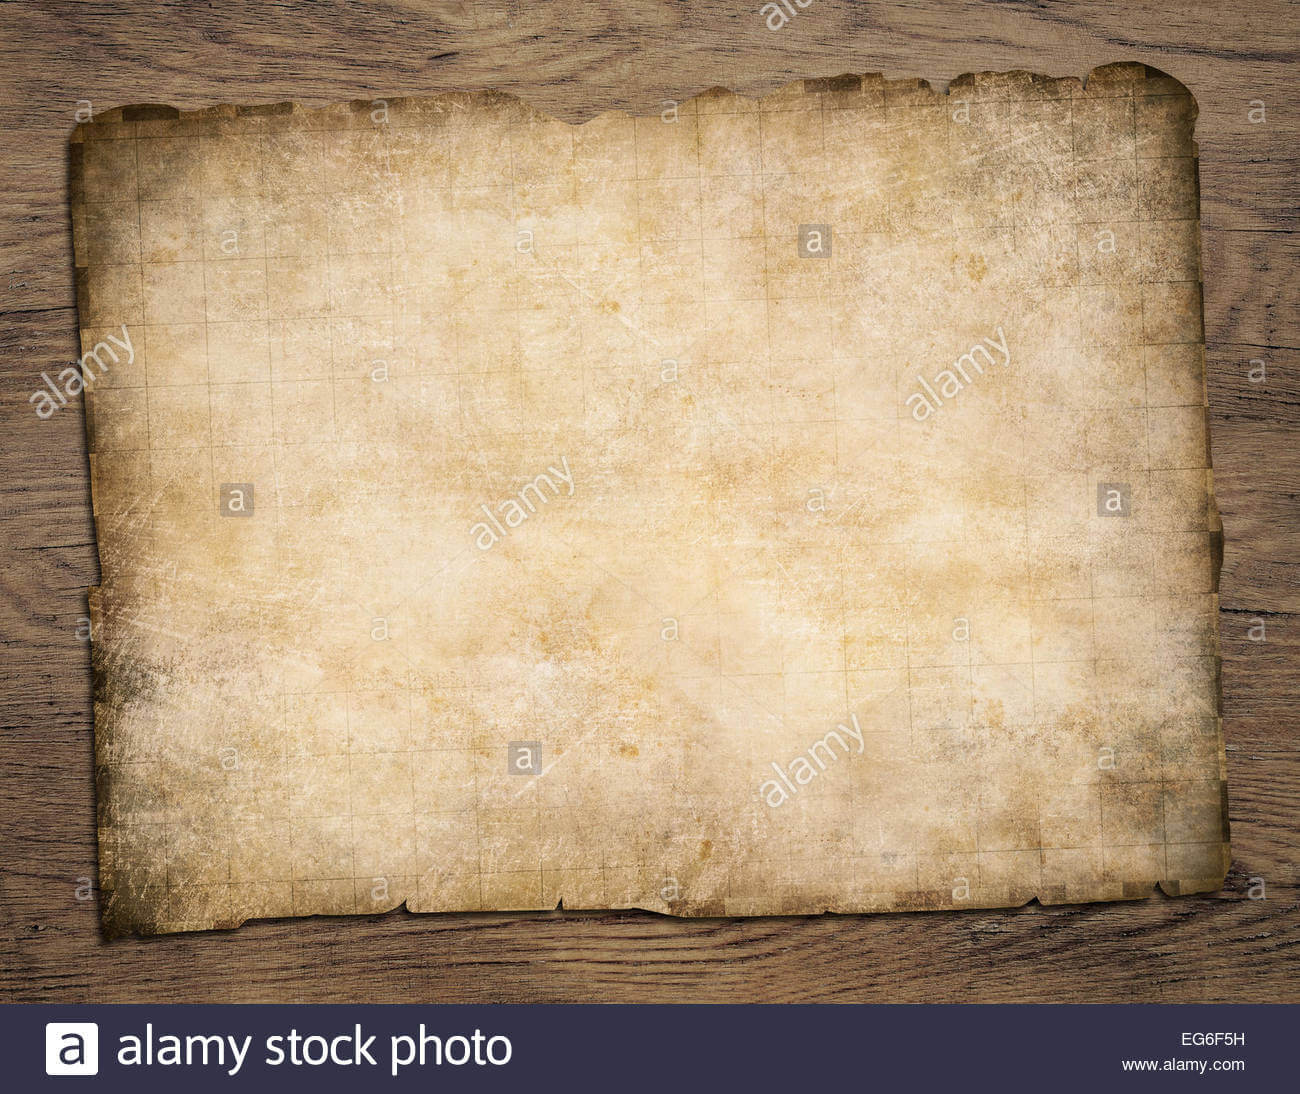 Old Blank Parchment Treasure Map On Wooden Table Stock Photo Pertaining To Blank Pirate Map Template